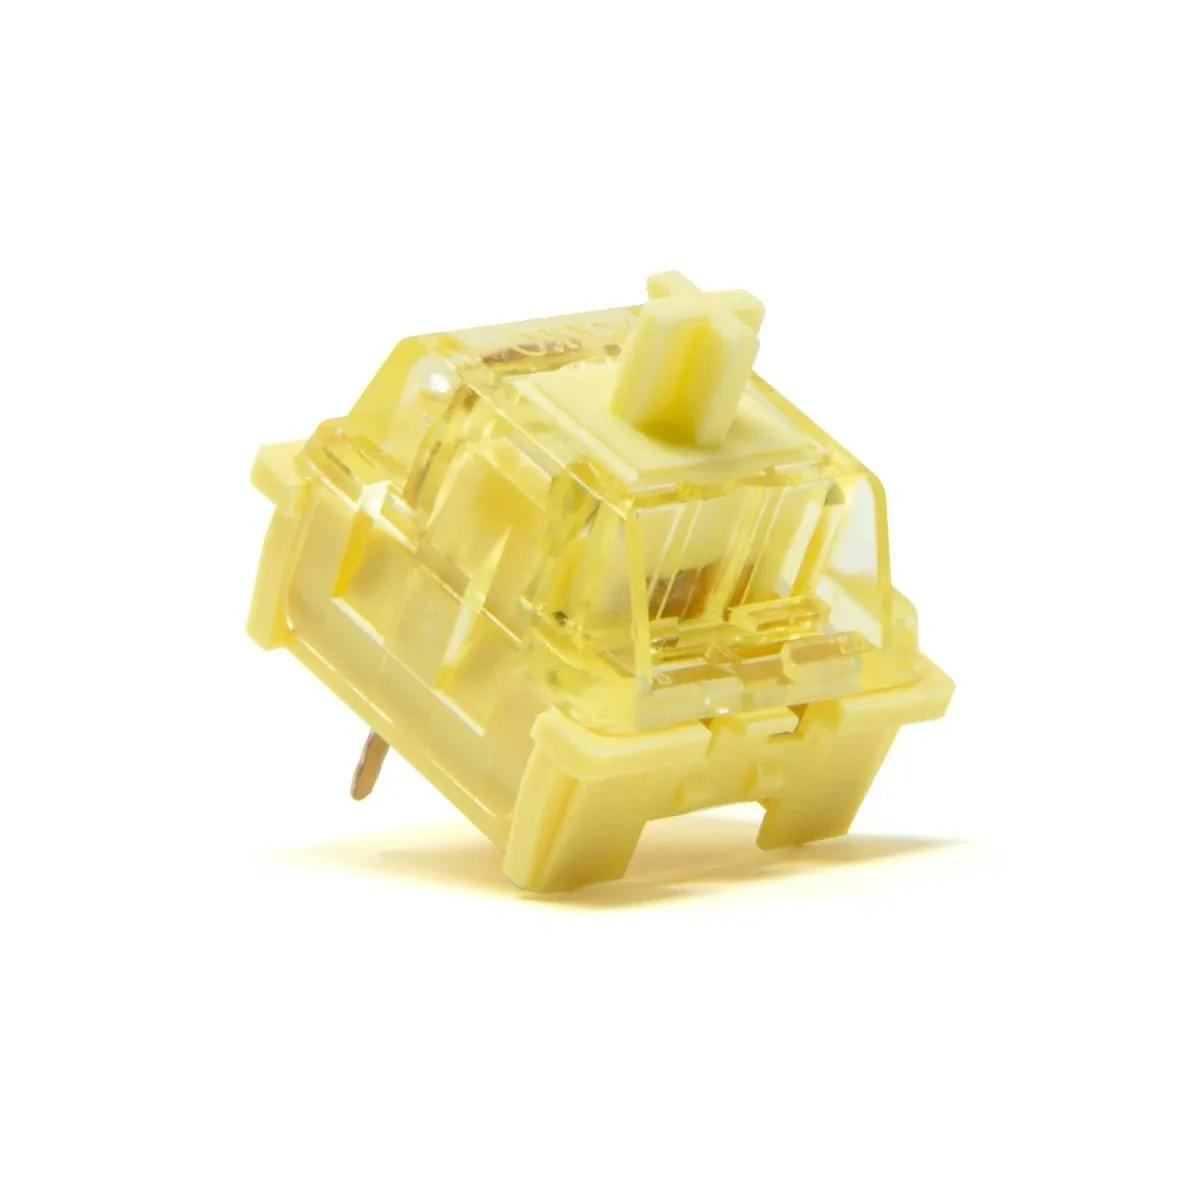 Image for Akko V3 Cream Yellow Linear Switches